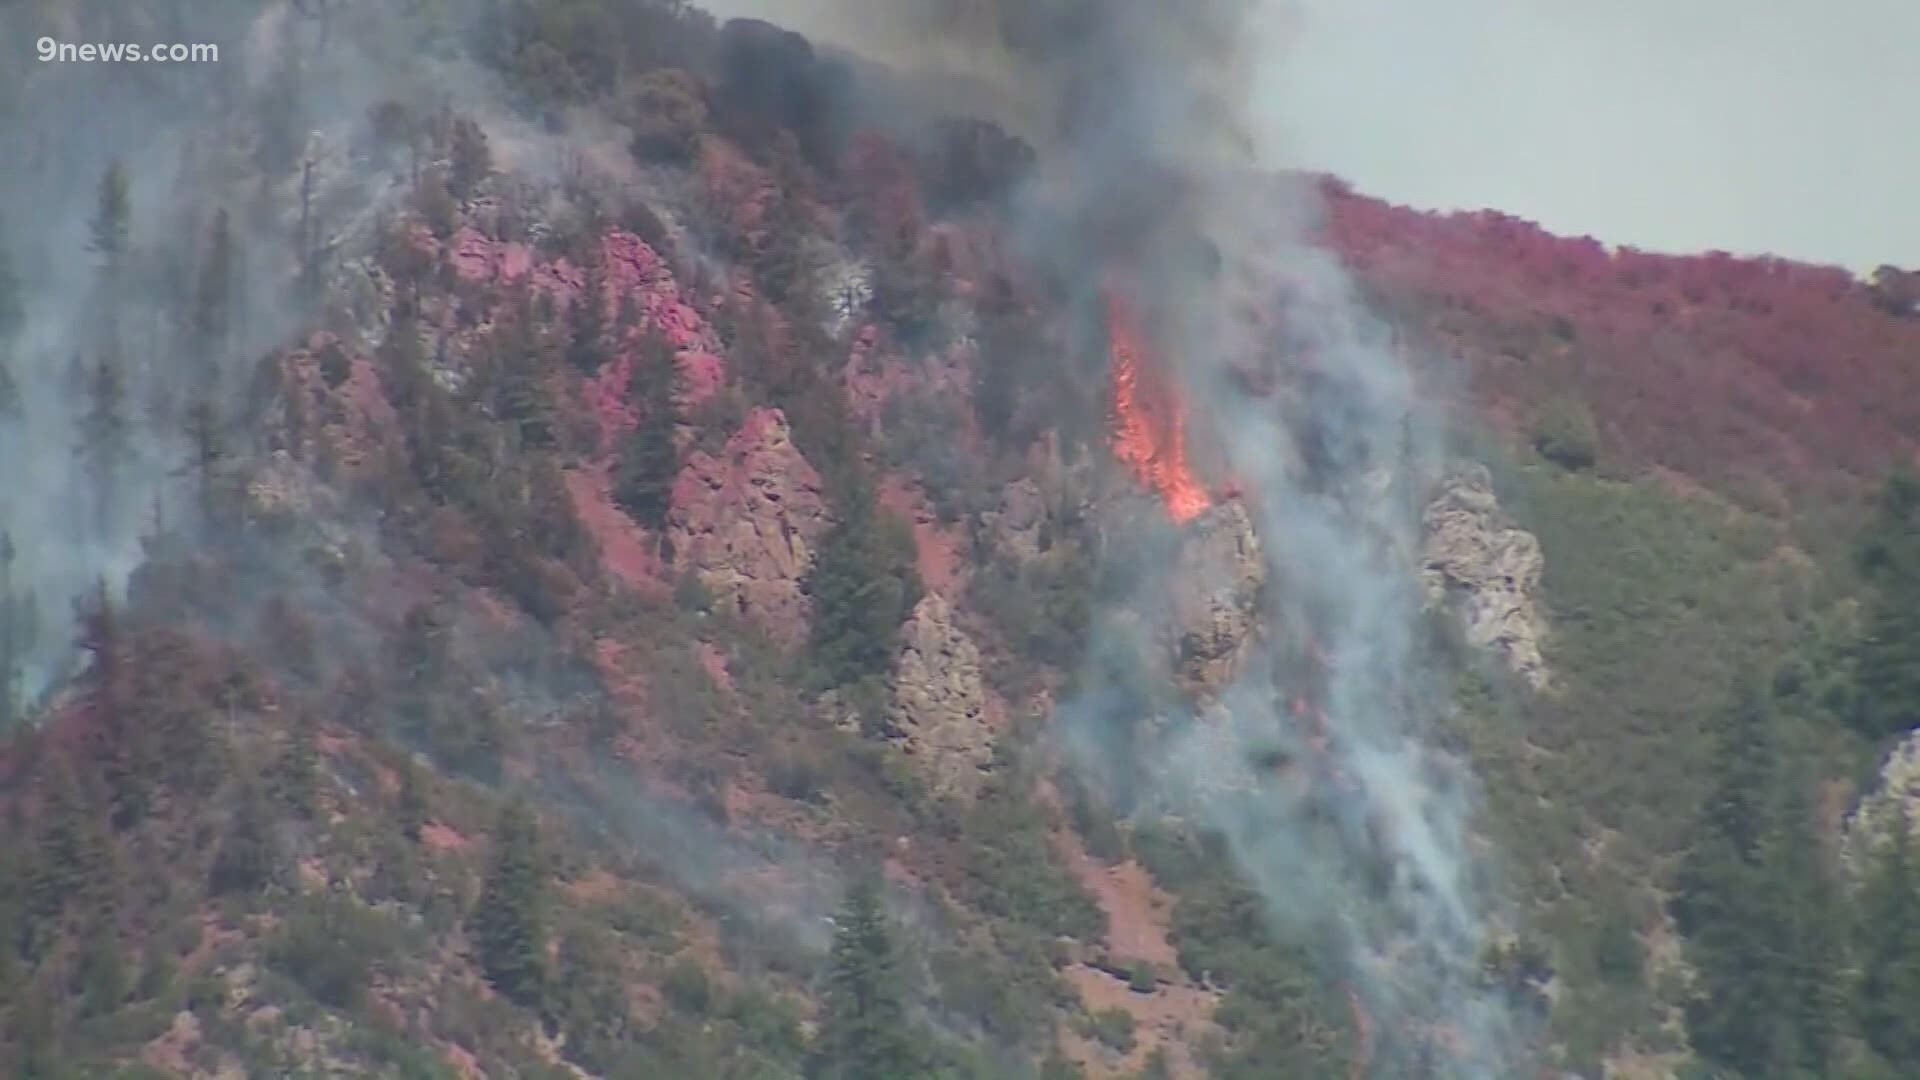 The largest wildfire in Colorado history has charred 139,007 acres since July 31.